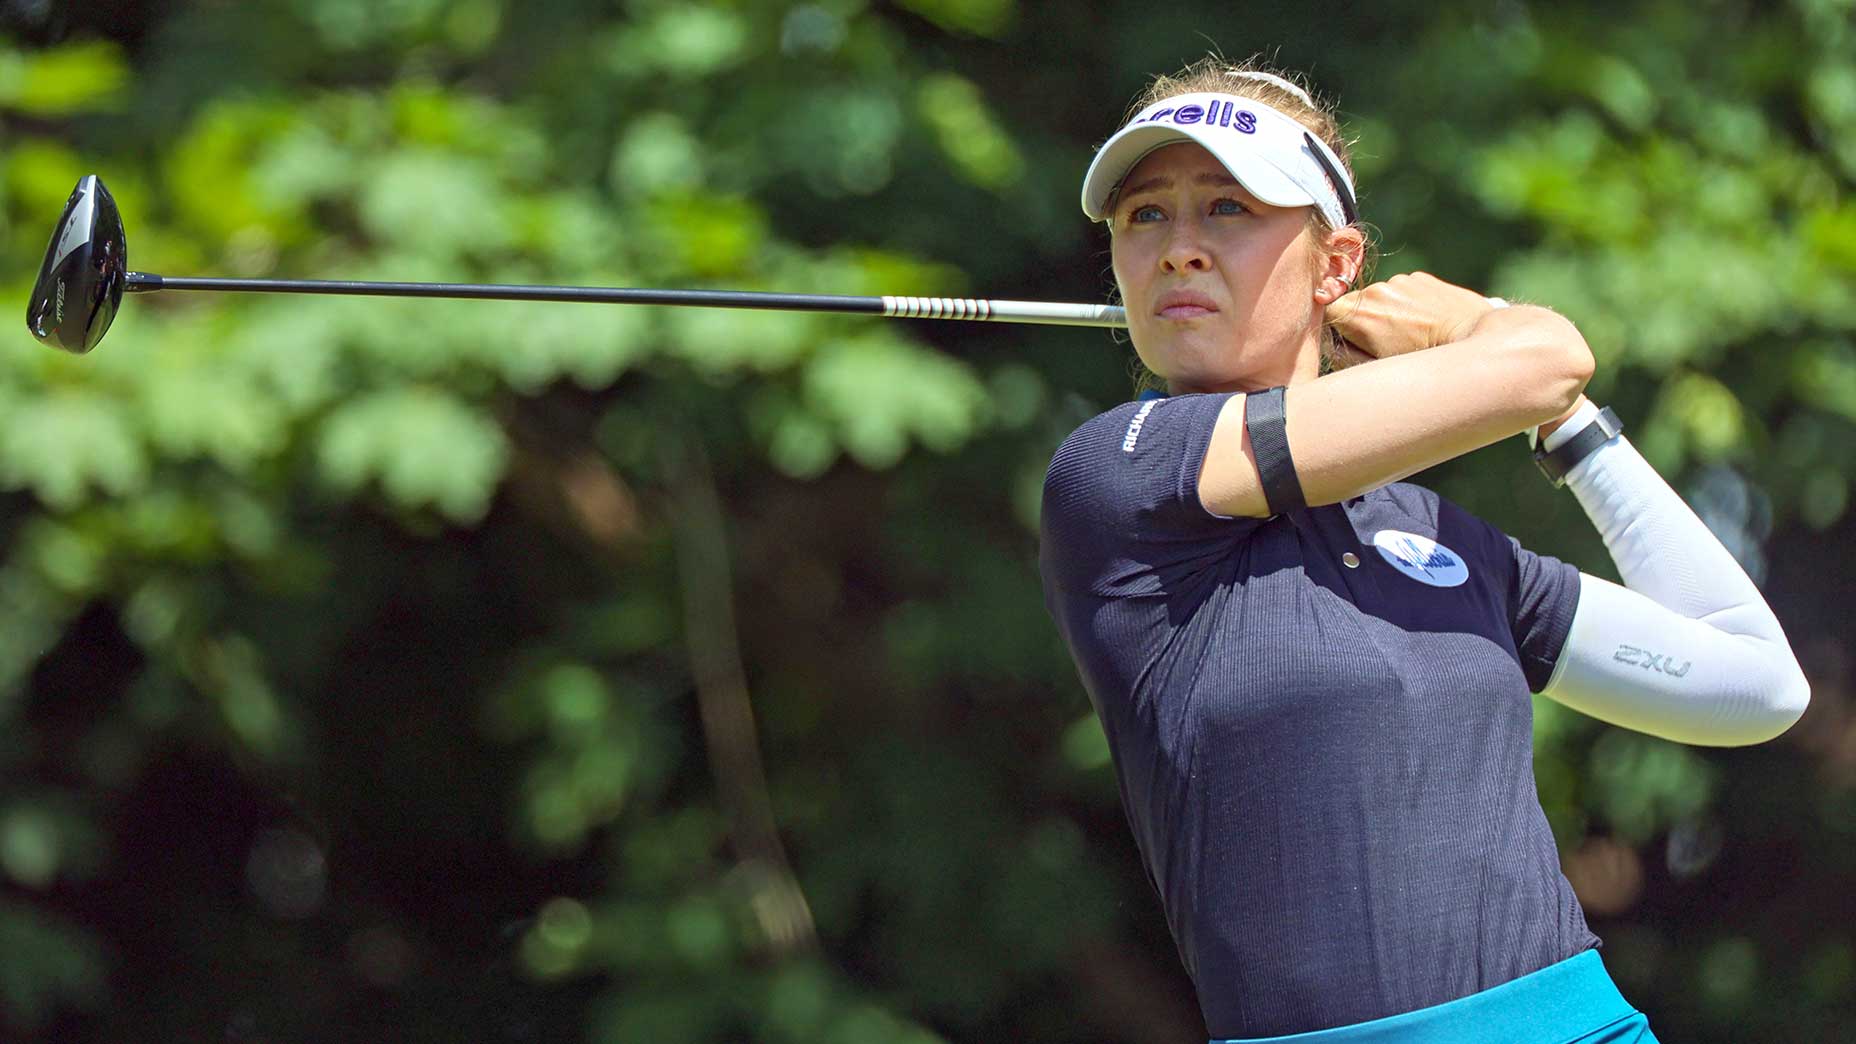 How to watch the KPMG Womens PGA Championship this week